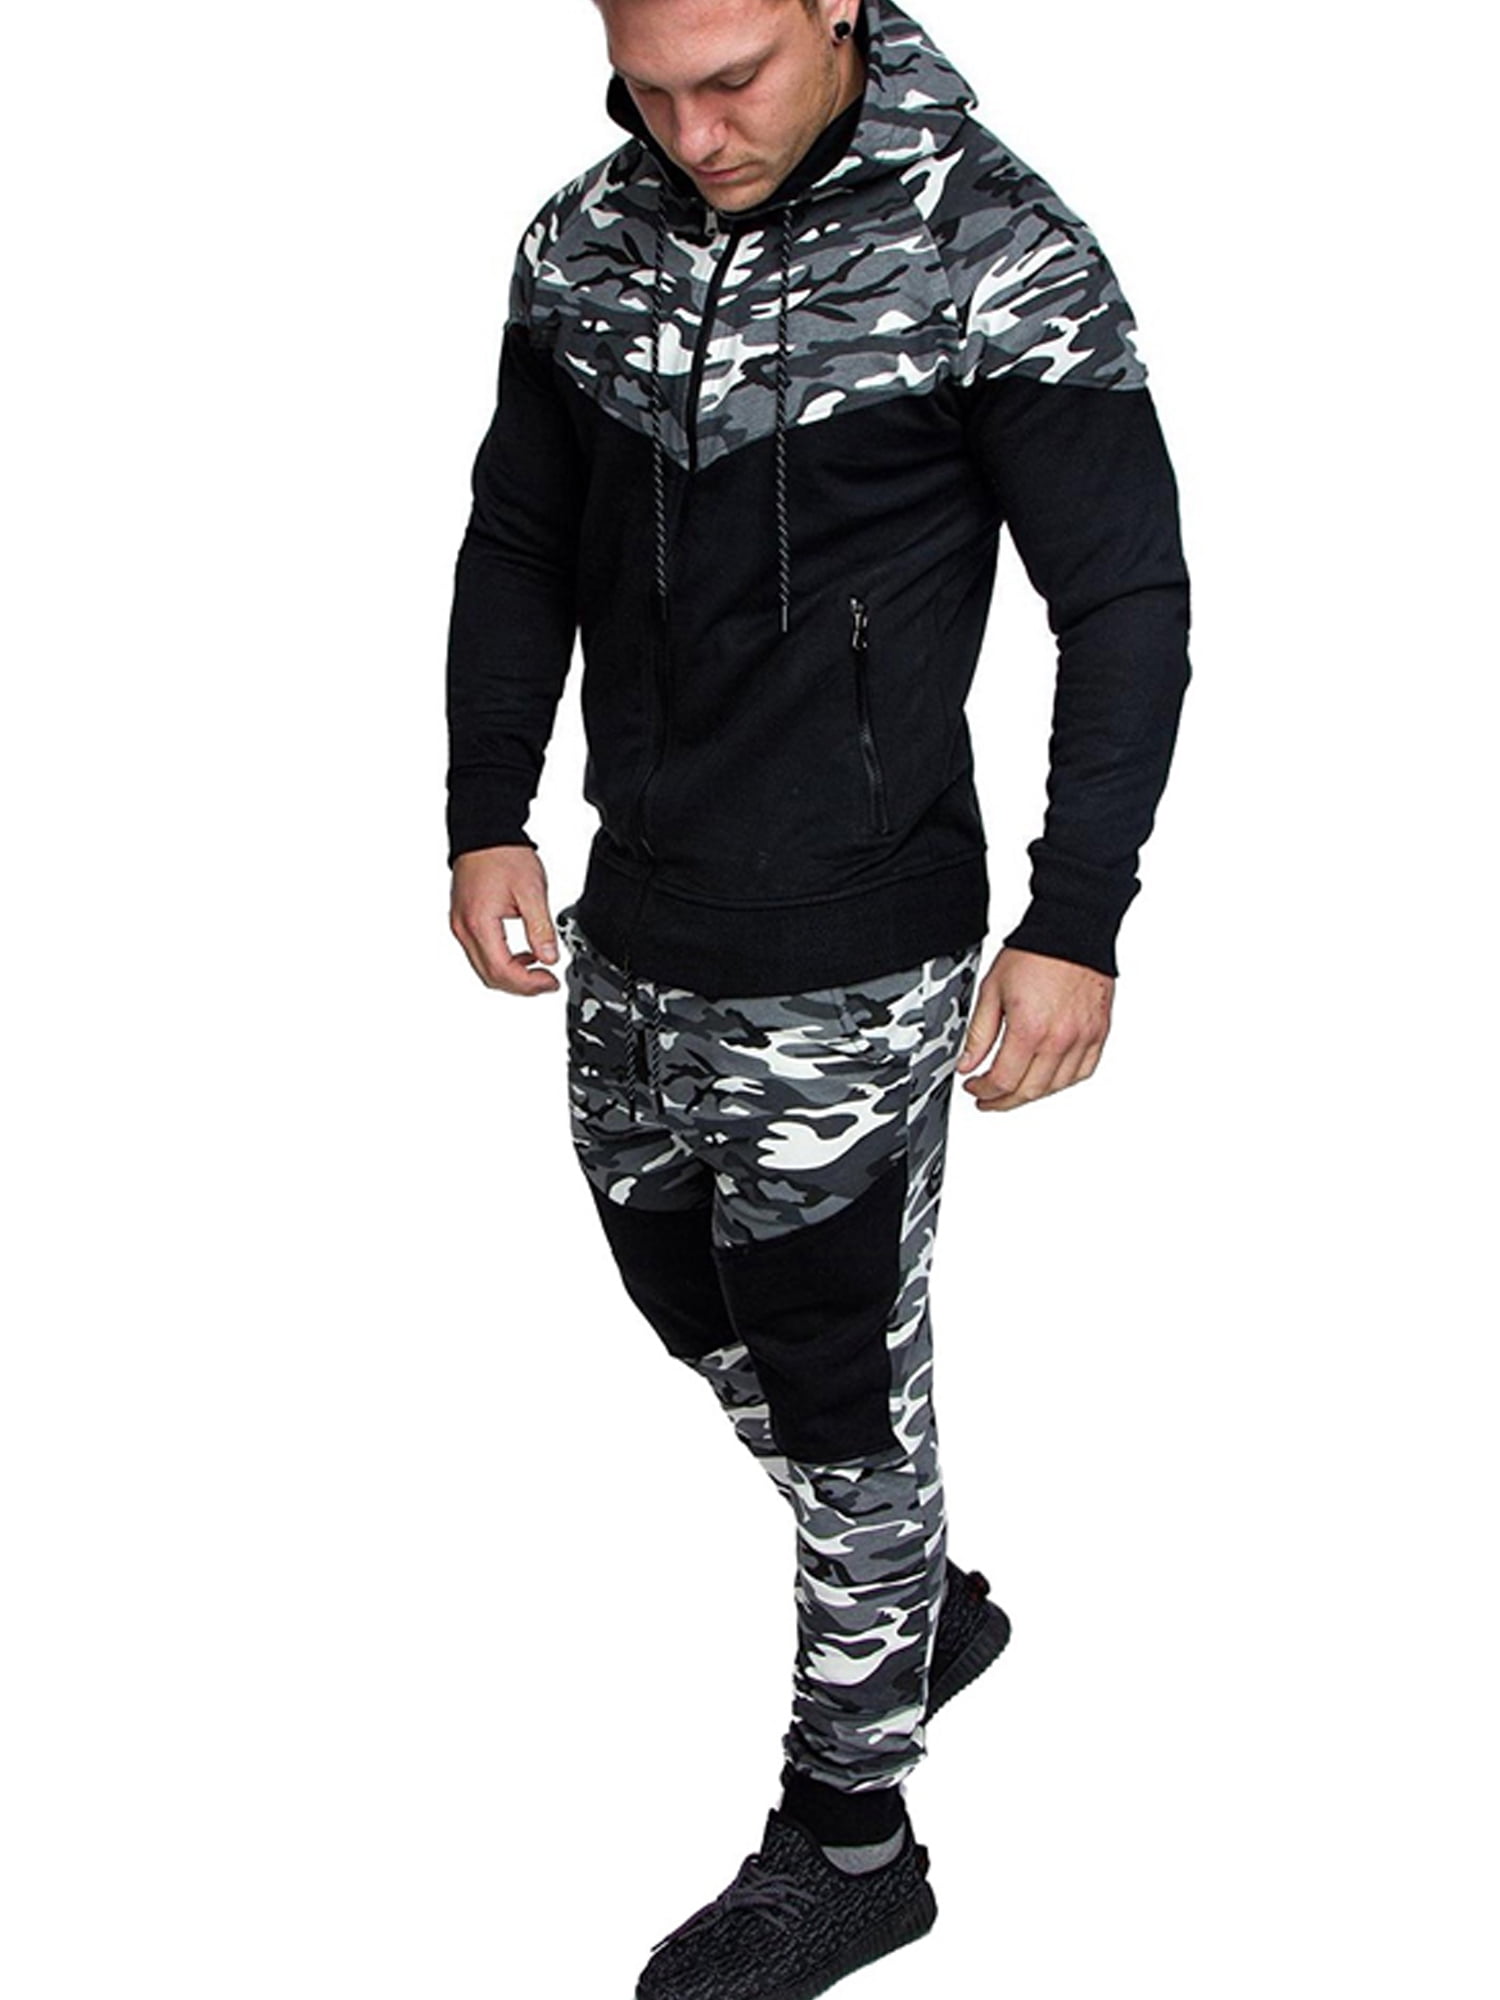 Boys Contrast Panel Tracksuit Hooded Hoodie Joggers Jogging Top Bottoms Pants